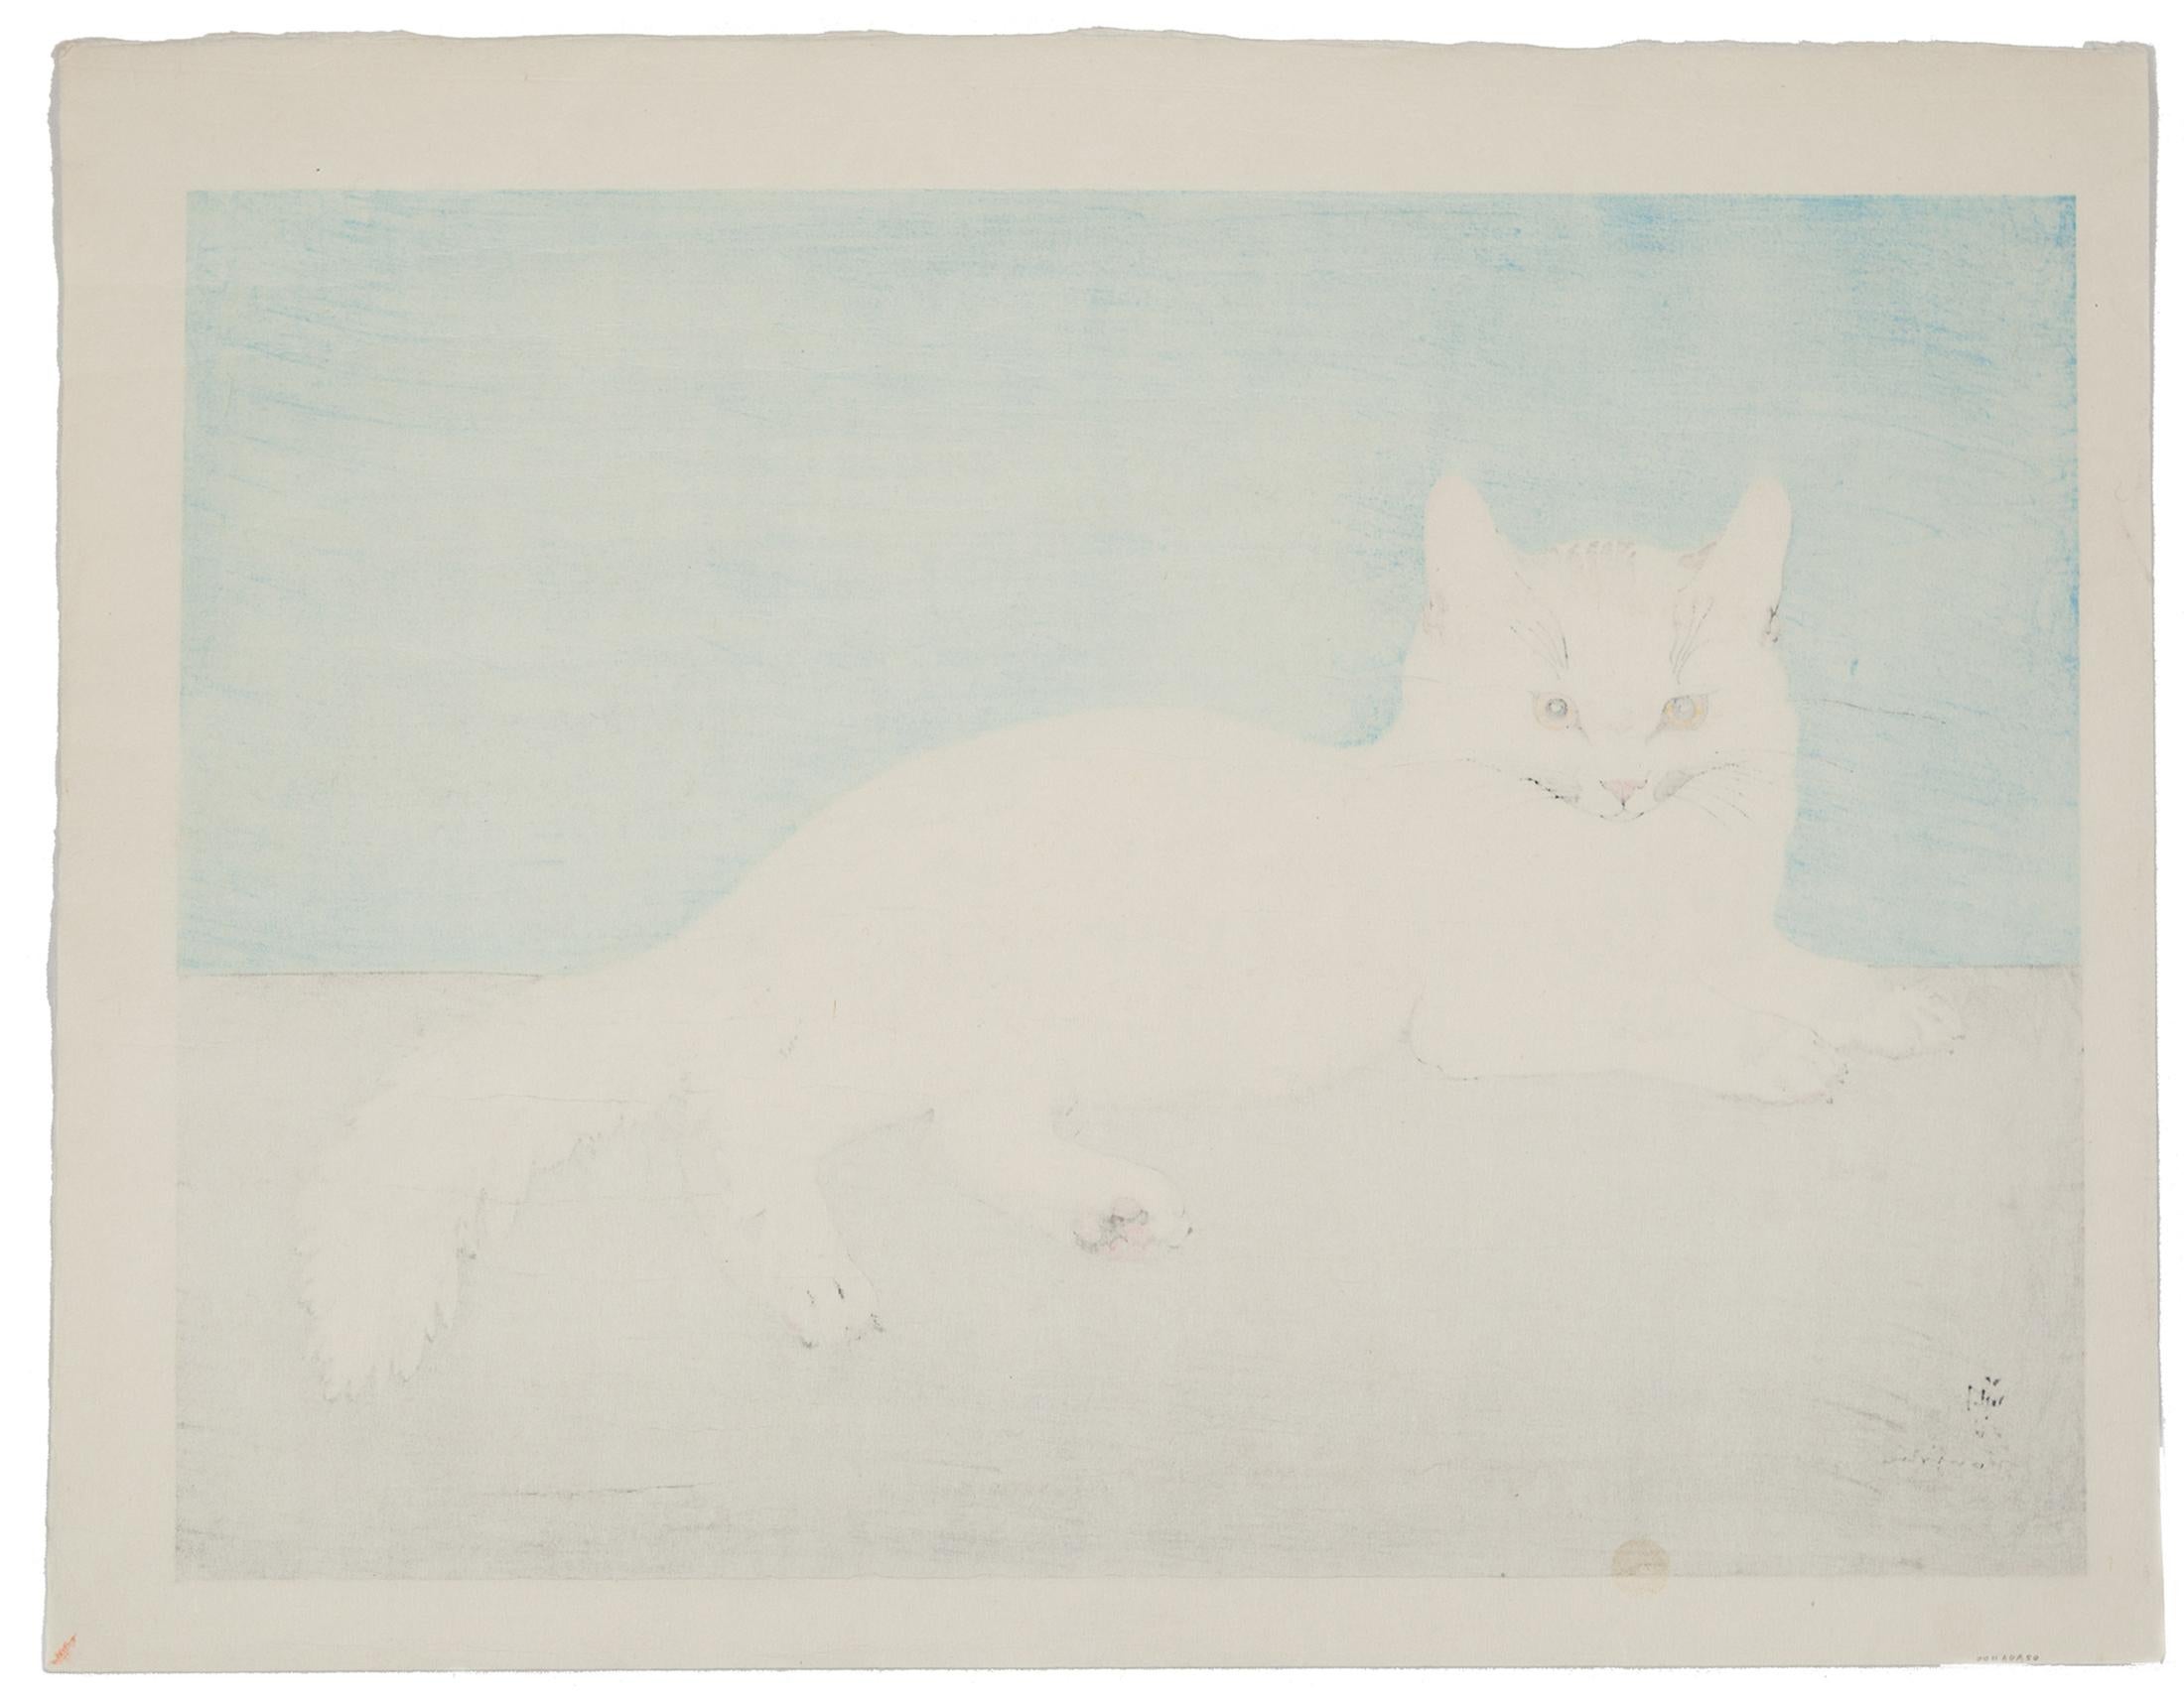 Artist: Léonard Tsuguharu Foujita (1886-1968)
Title: White Cat
Date: Early 20th century
Dimensions: 49.3 x 38.4 cm

”The reason why I so much enjoy being friends with cats is that they have two different characters: a wild side and a domestic